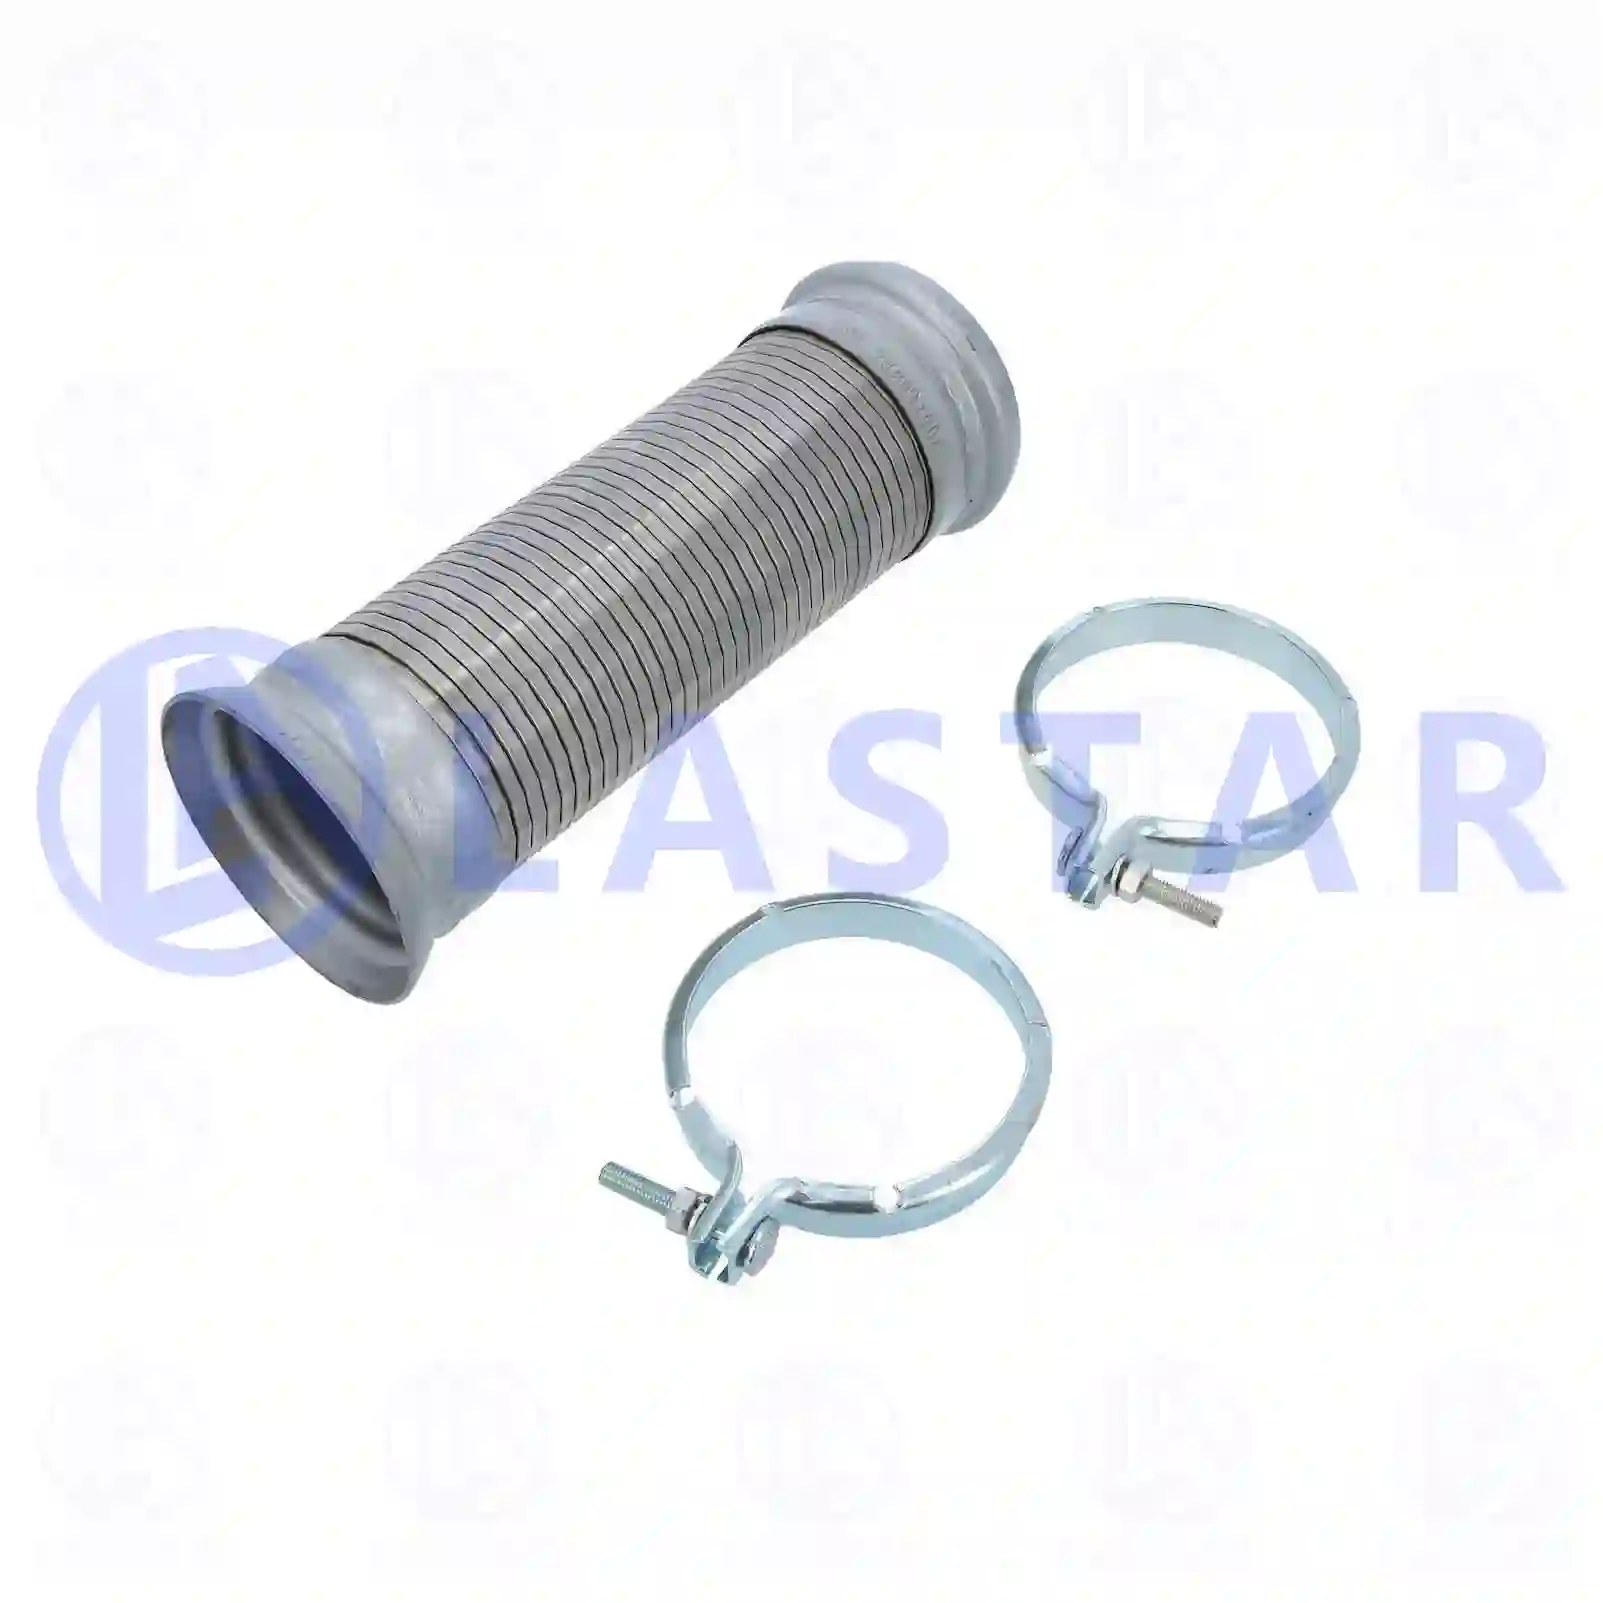 Flexible Pipe Flexible pipe, with clamps, la no: 77706413 ,  oem no:6204900465S1 Lastar Spare Part | Truck Spare Parts, Auotomotive Spare Parts